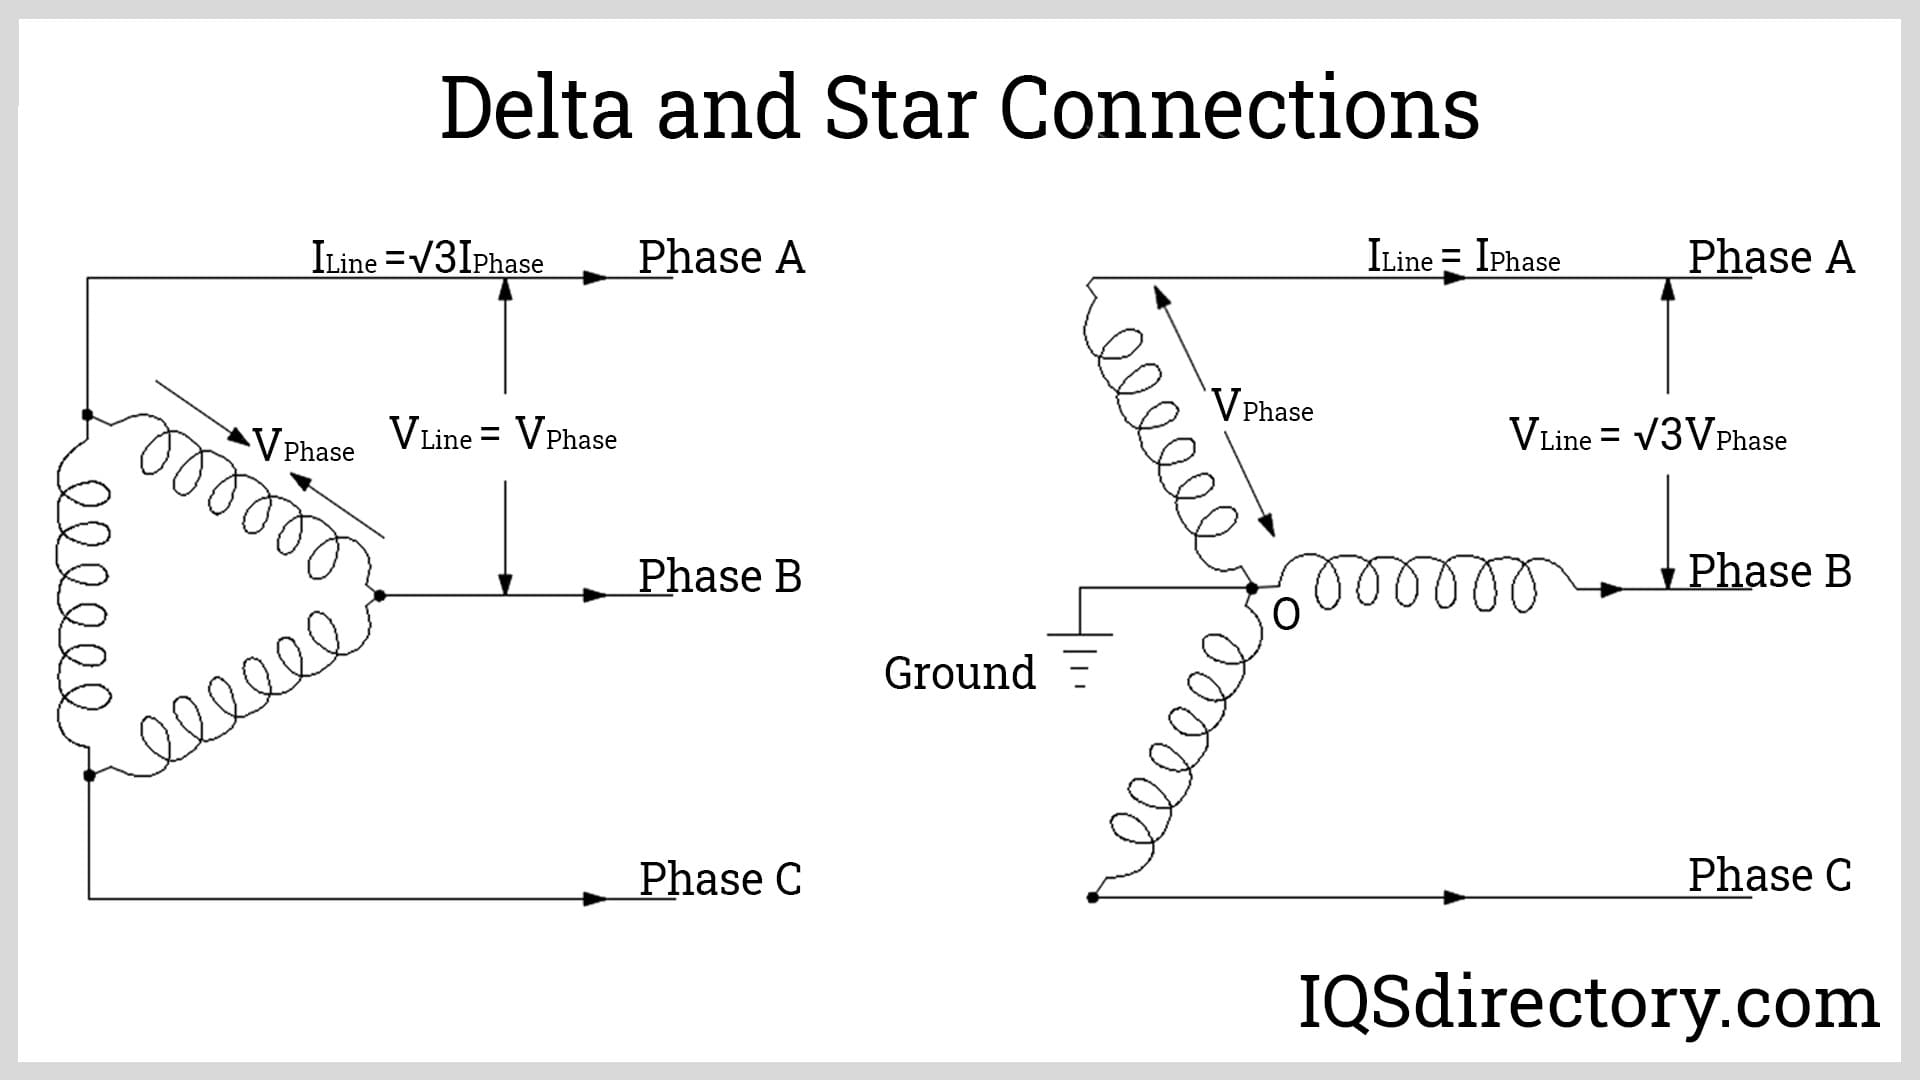 Delta and Star Connections